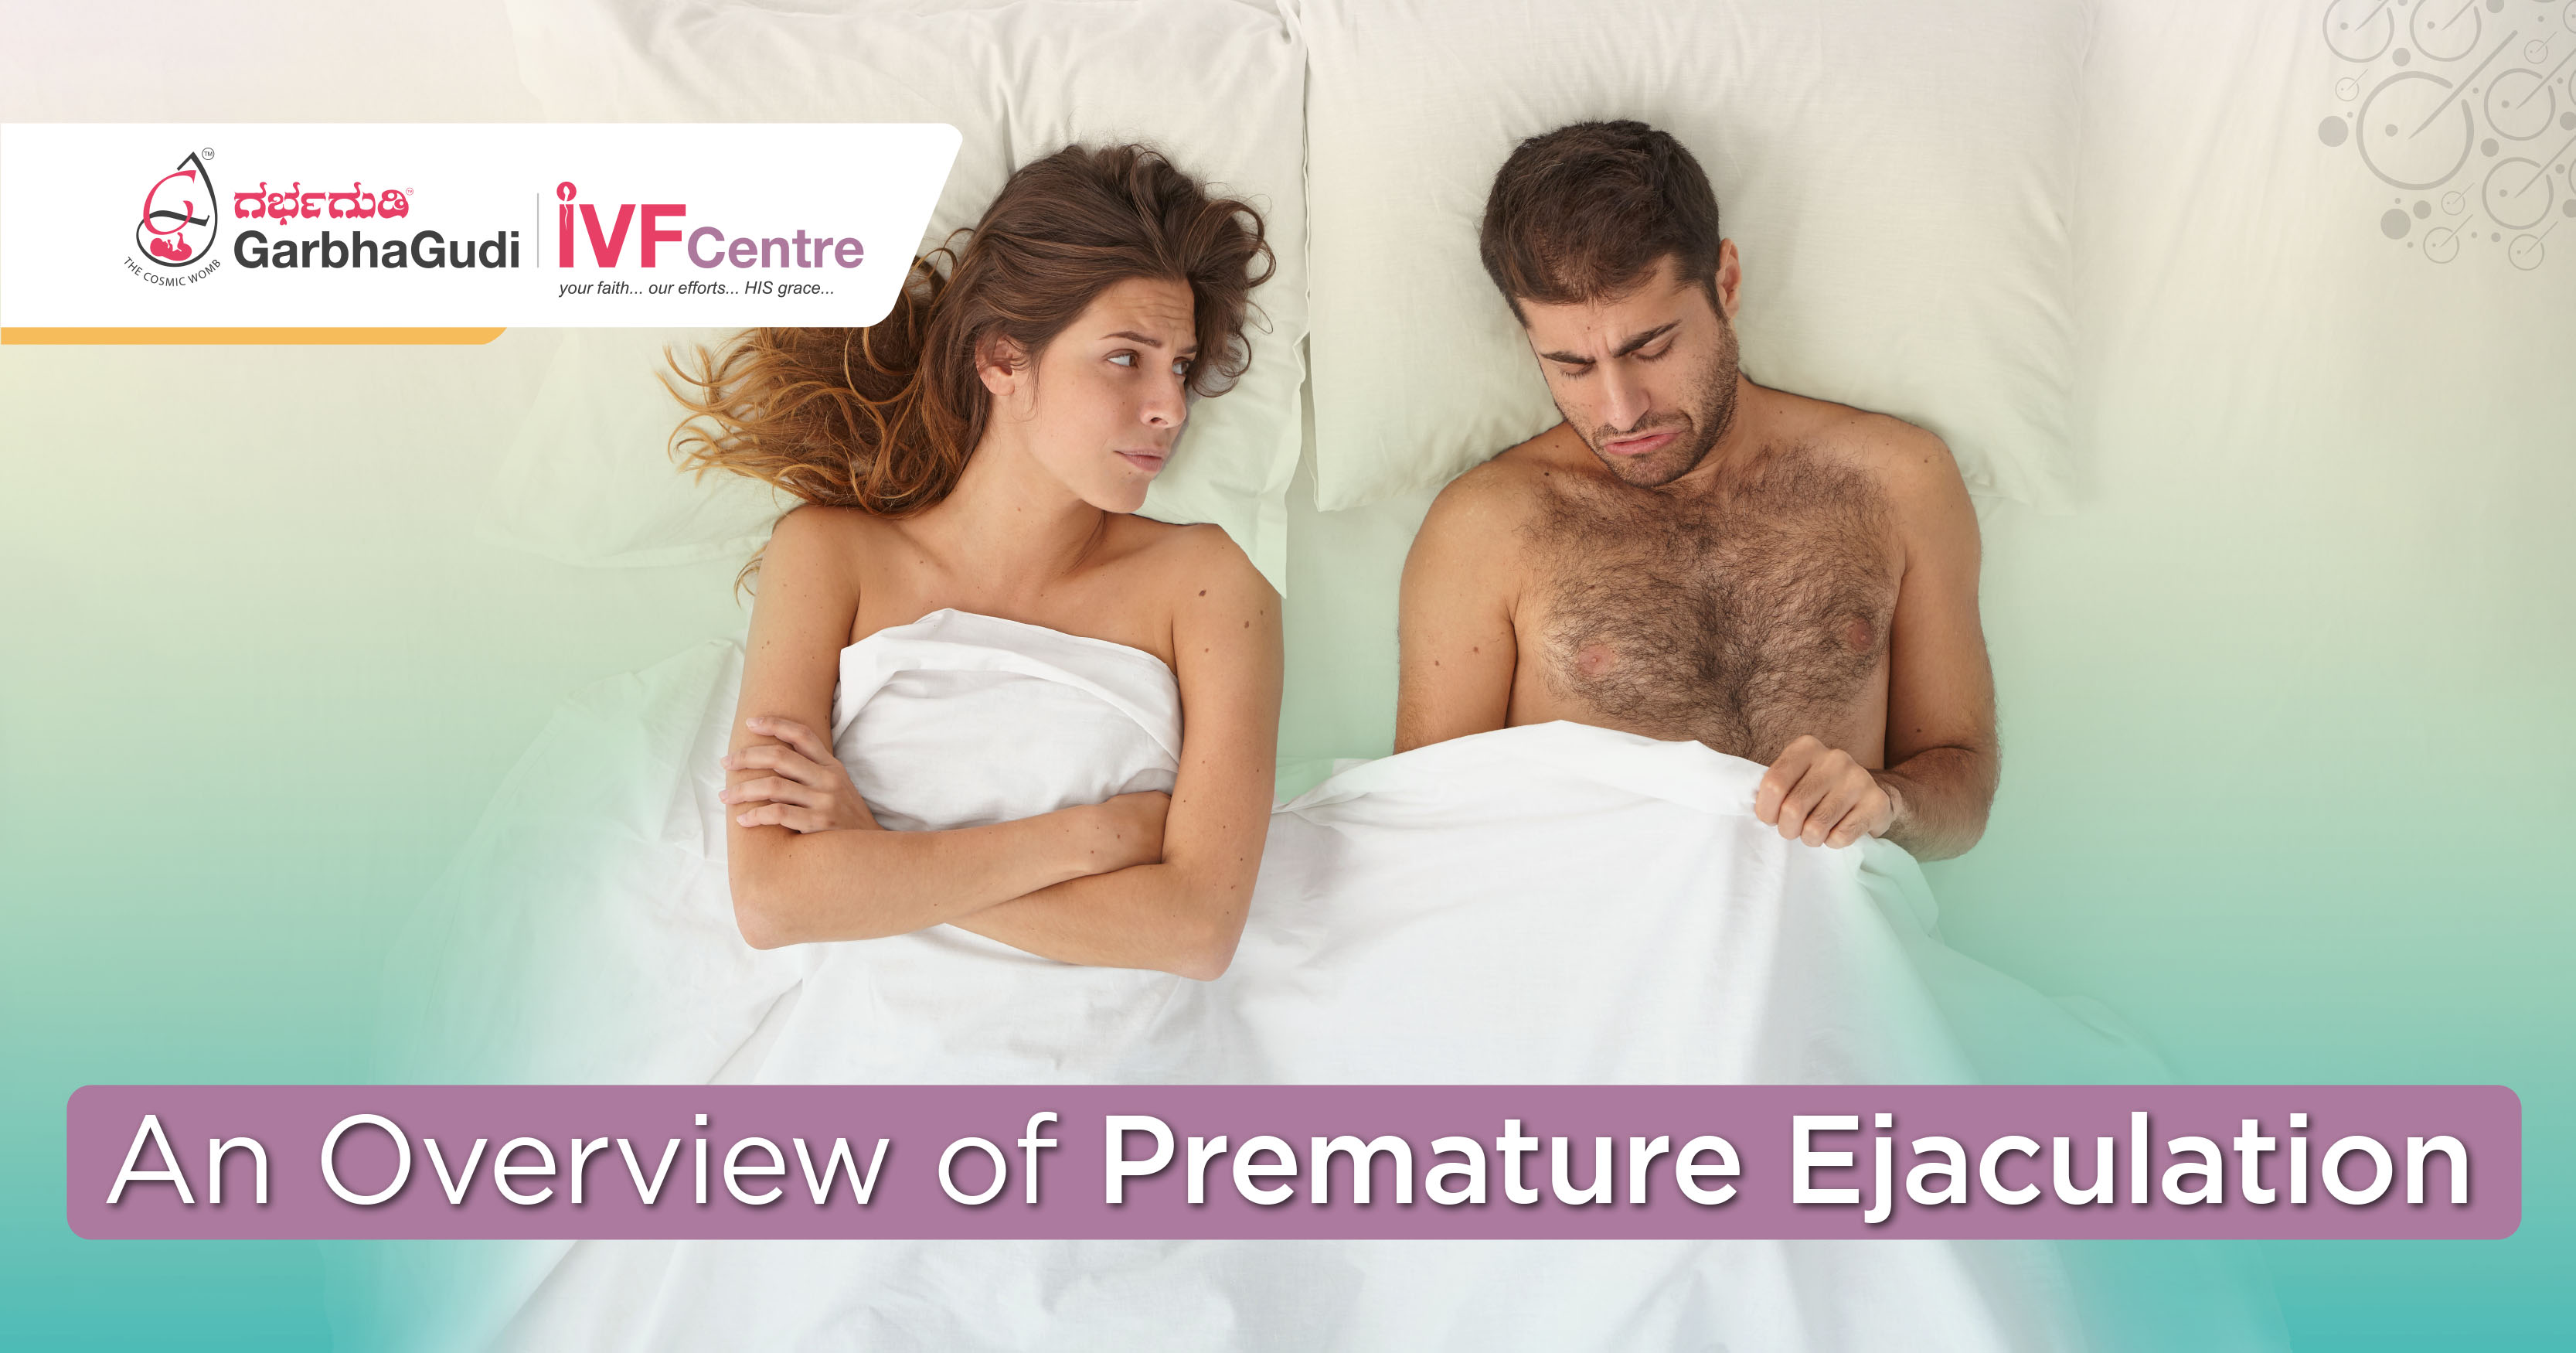 An Overview of Premature Ejaculation